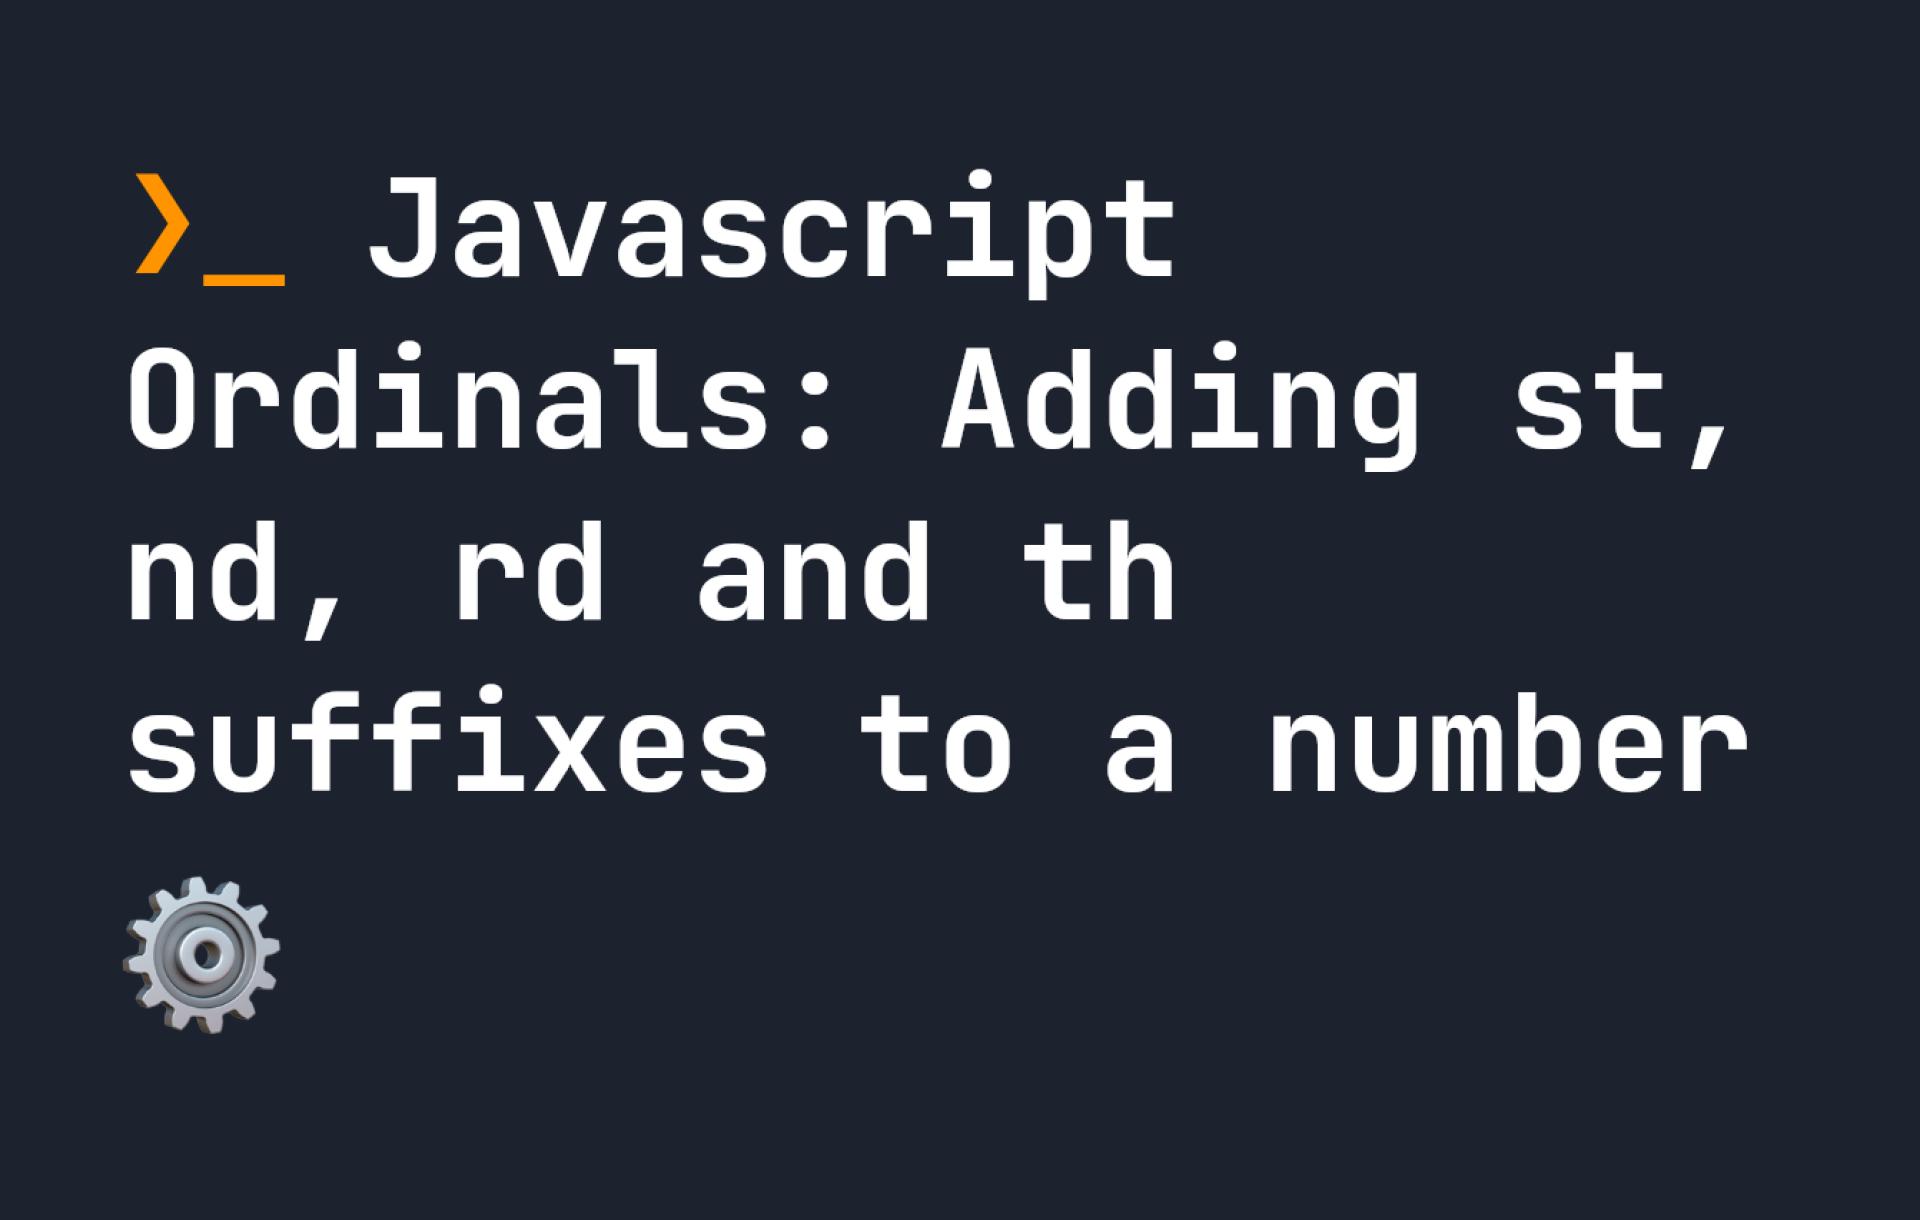 Javascript Ordinals: Adding st, nd, rd and th suffixes to a number